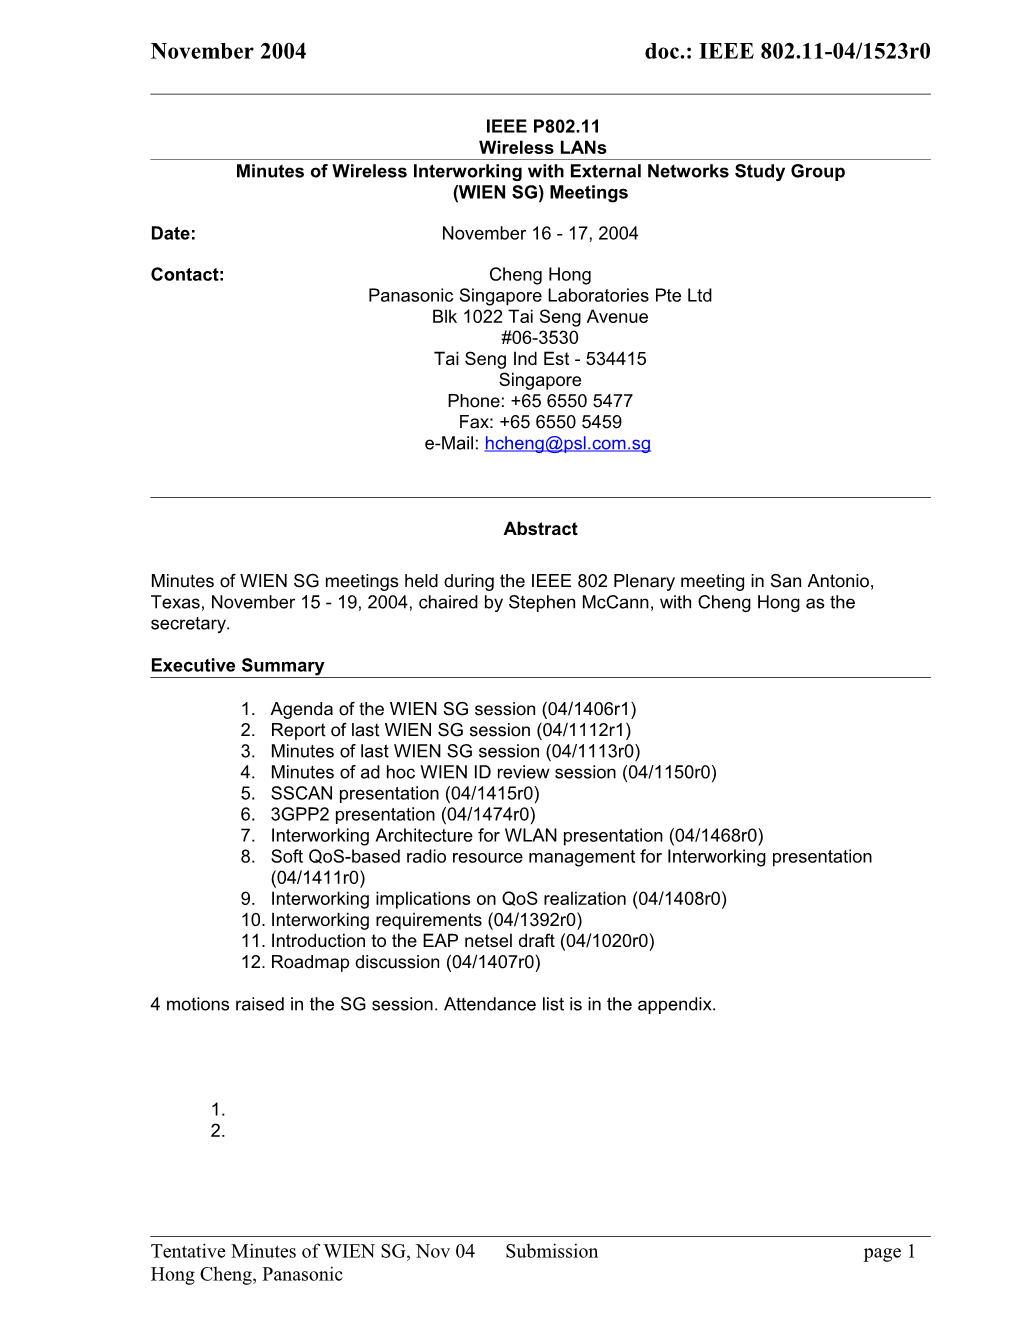 Minutes of Wireless Interworking with External Networks Study Group (WIEN SG) Meetings